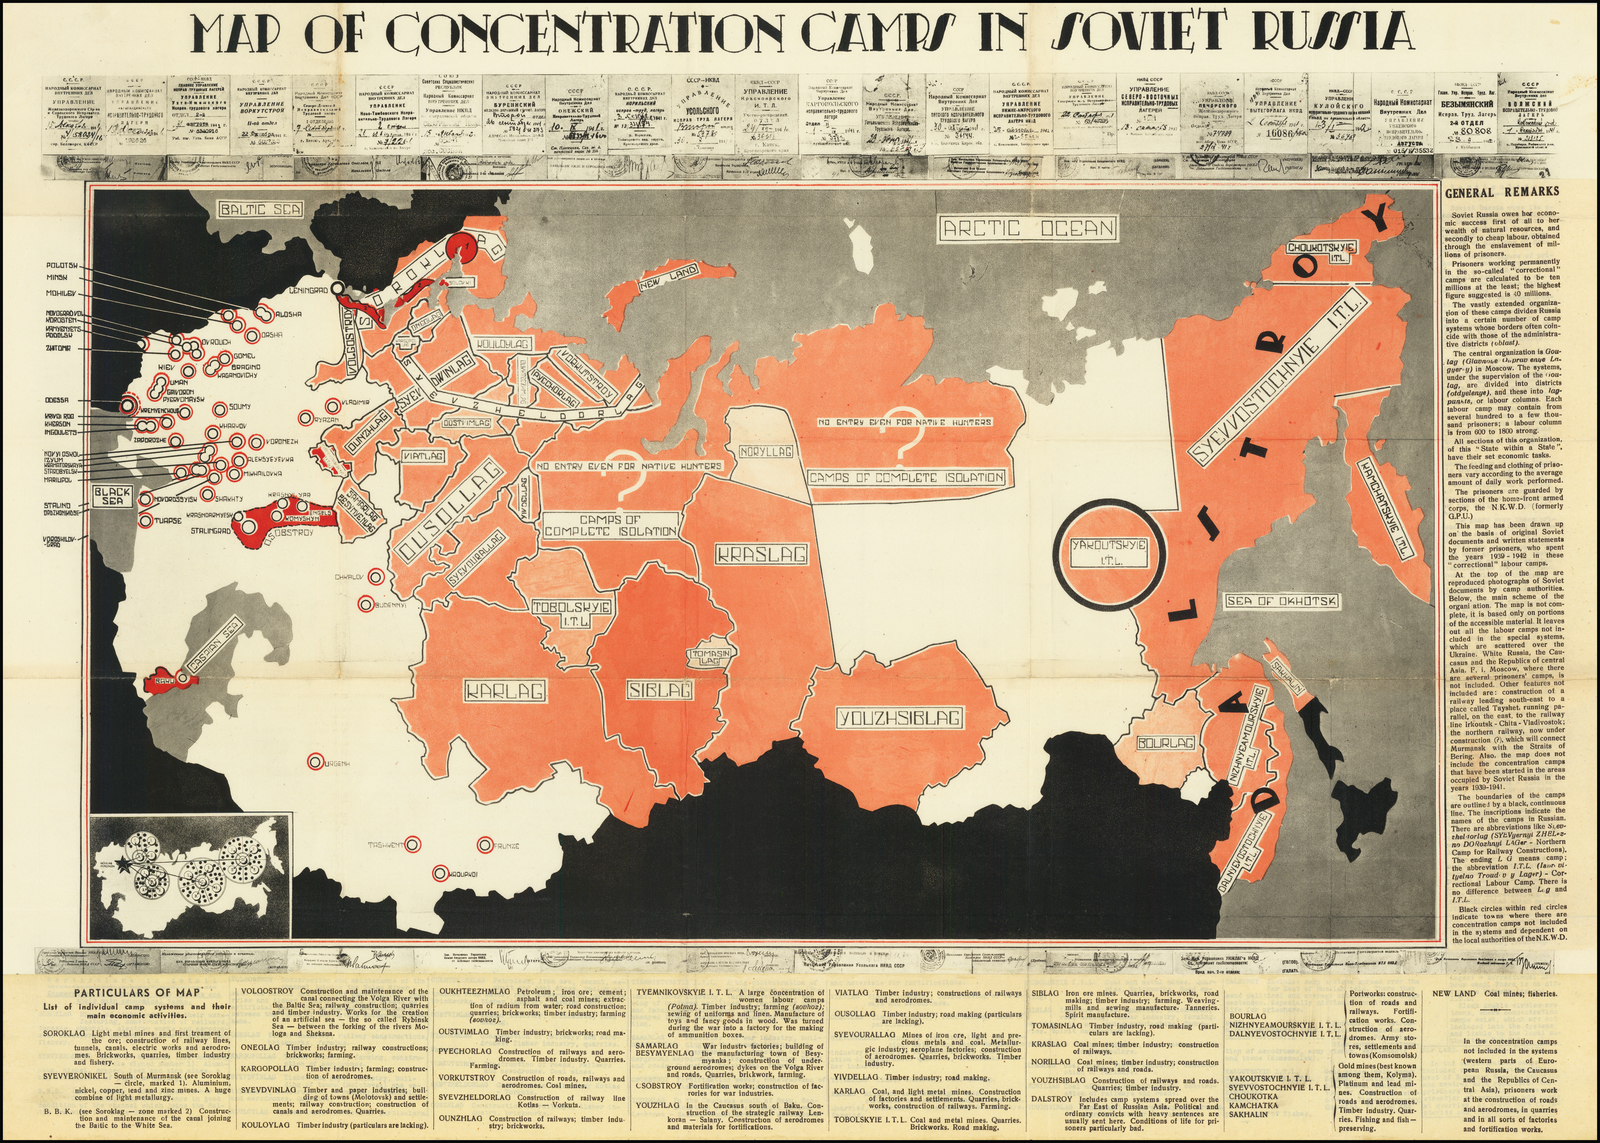 Map of Soviet Concentration Camps